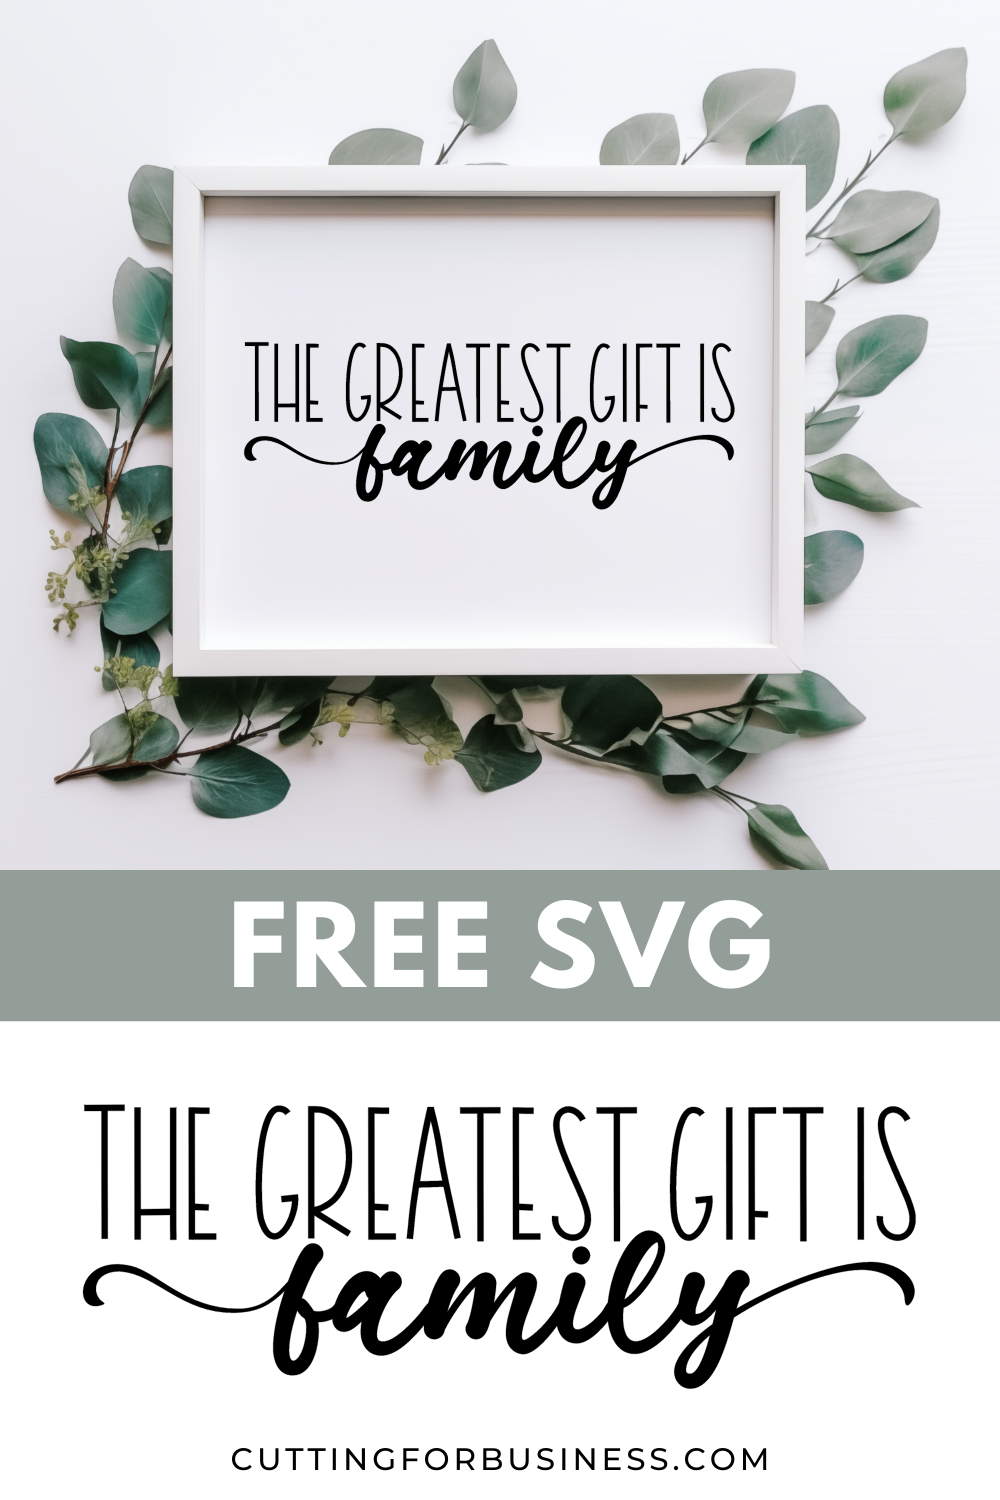 Free SVG - The Greatest Gift is Family - cuttingforbusiness.com